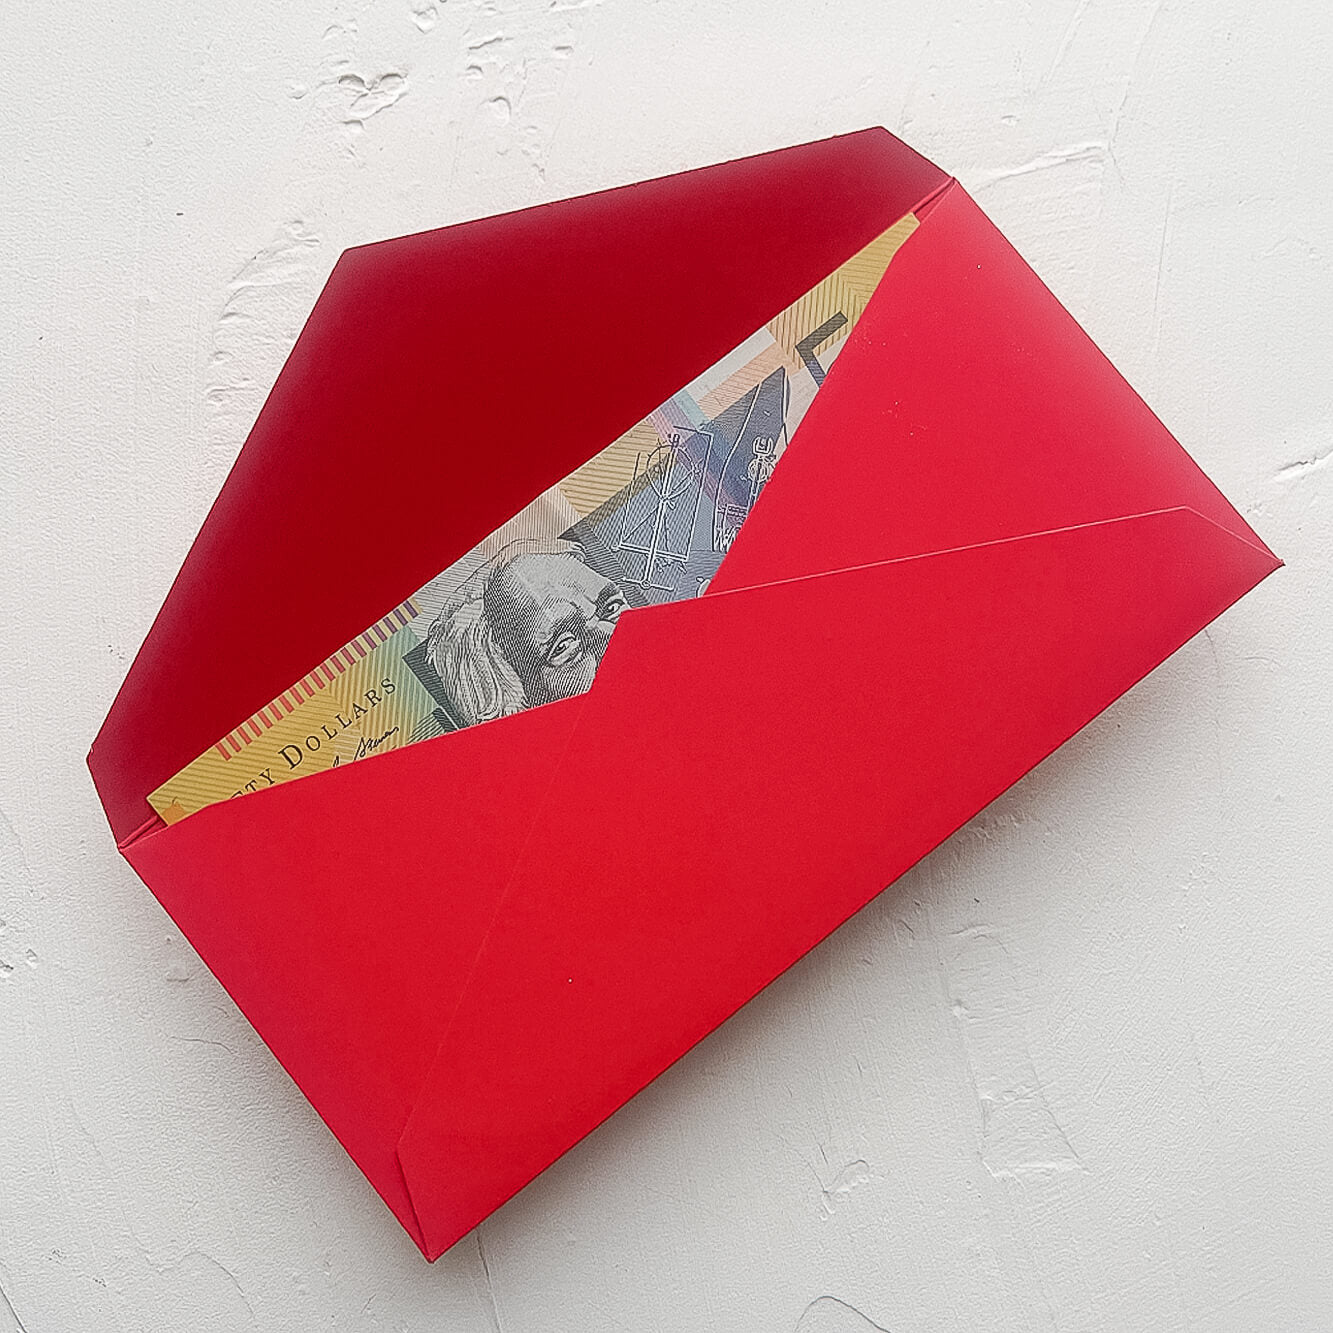 A photo of a red envelope or hongbao or ang pao or lucky packet that is open, showing an Australian fifty dollar note tucked inside..